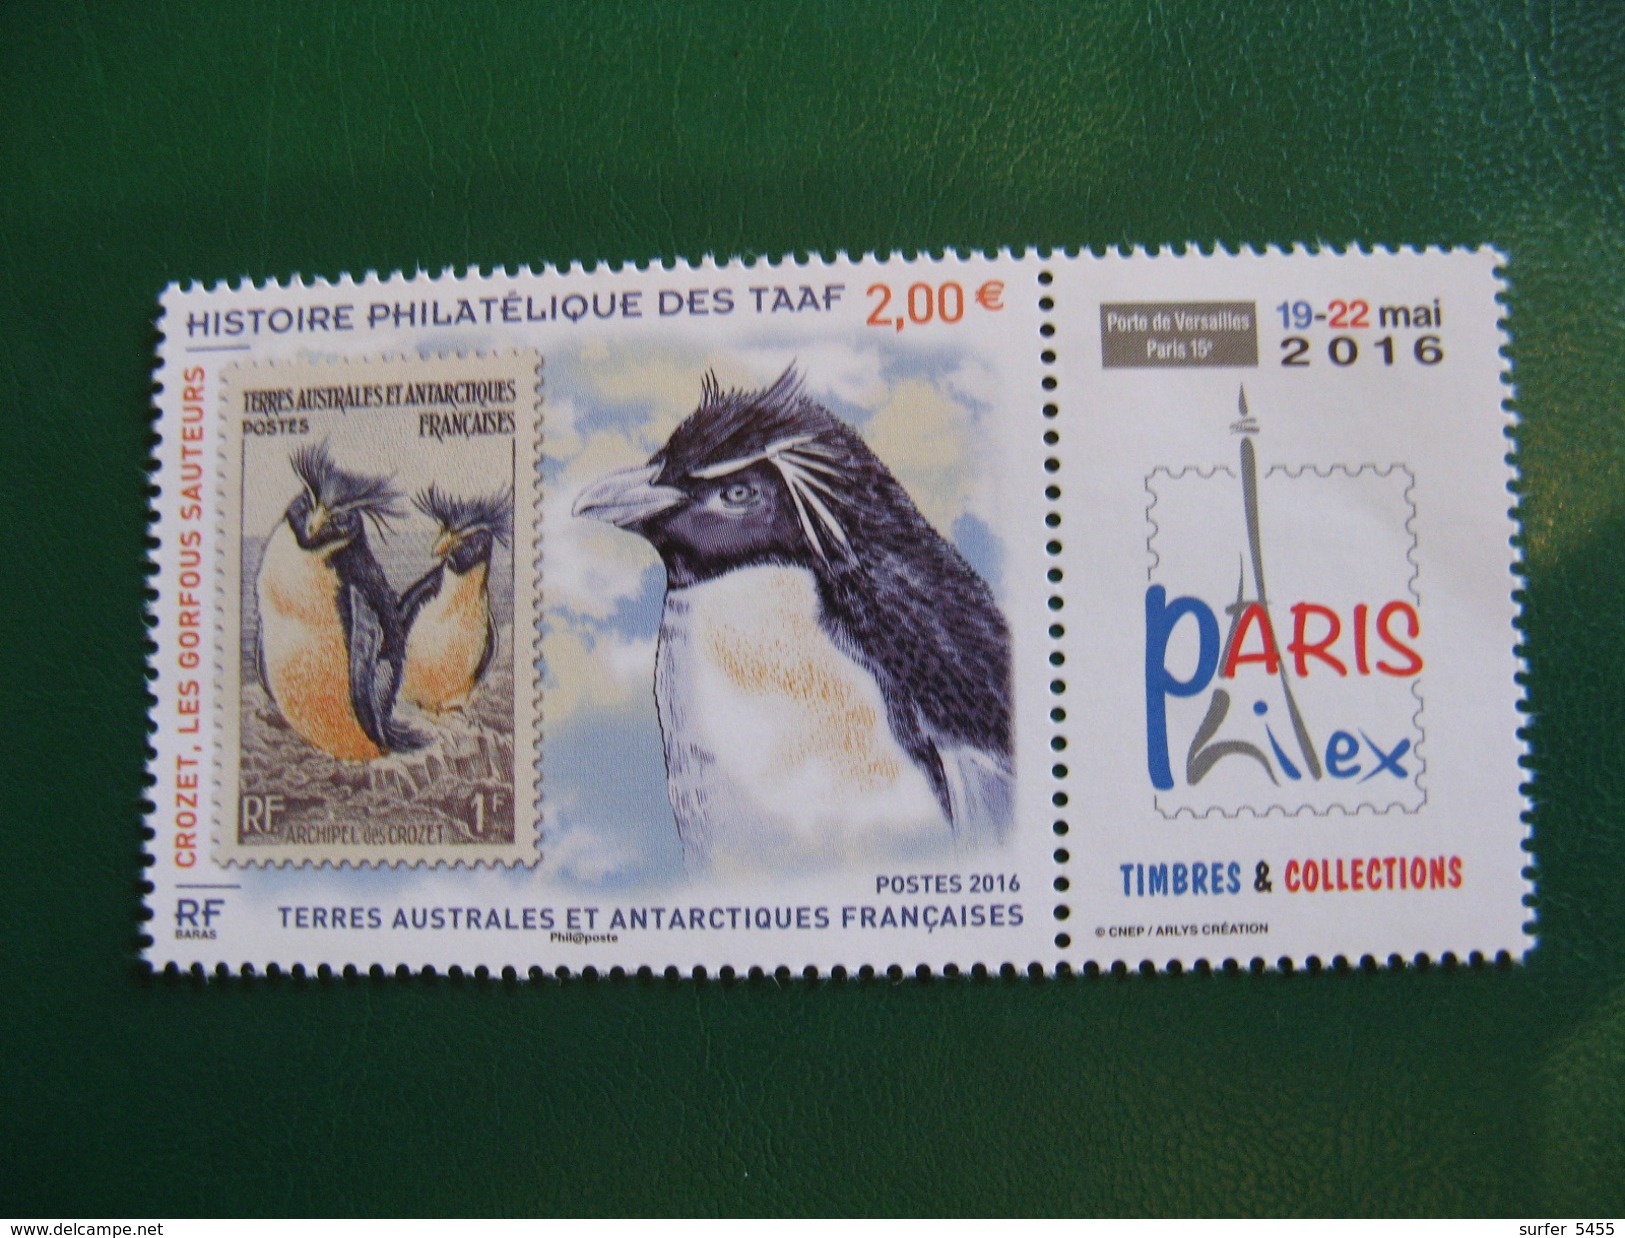 TAAF YVERT POSTE ORDINAIRE N° 789 - TIMBRE NEUF** LUXE - MNH - SERIE COMPLETE - FACIALE 2,00 EUROS - Ungebraucht